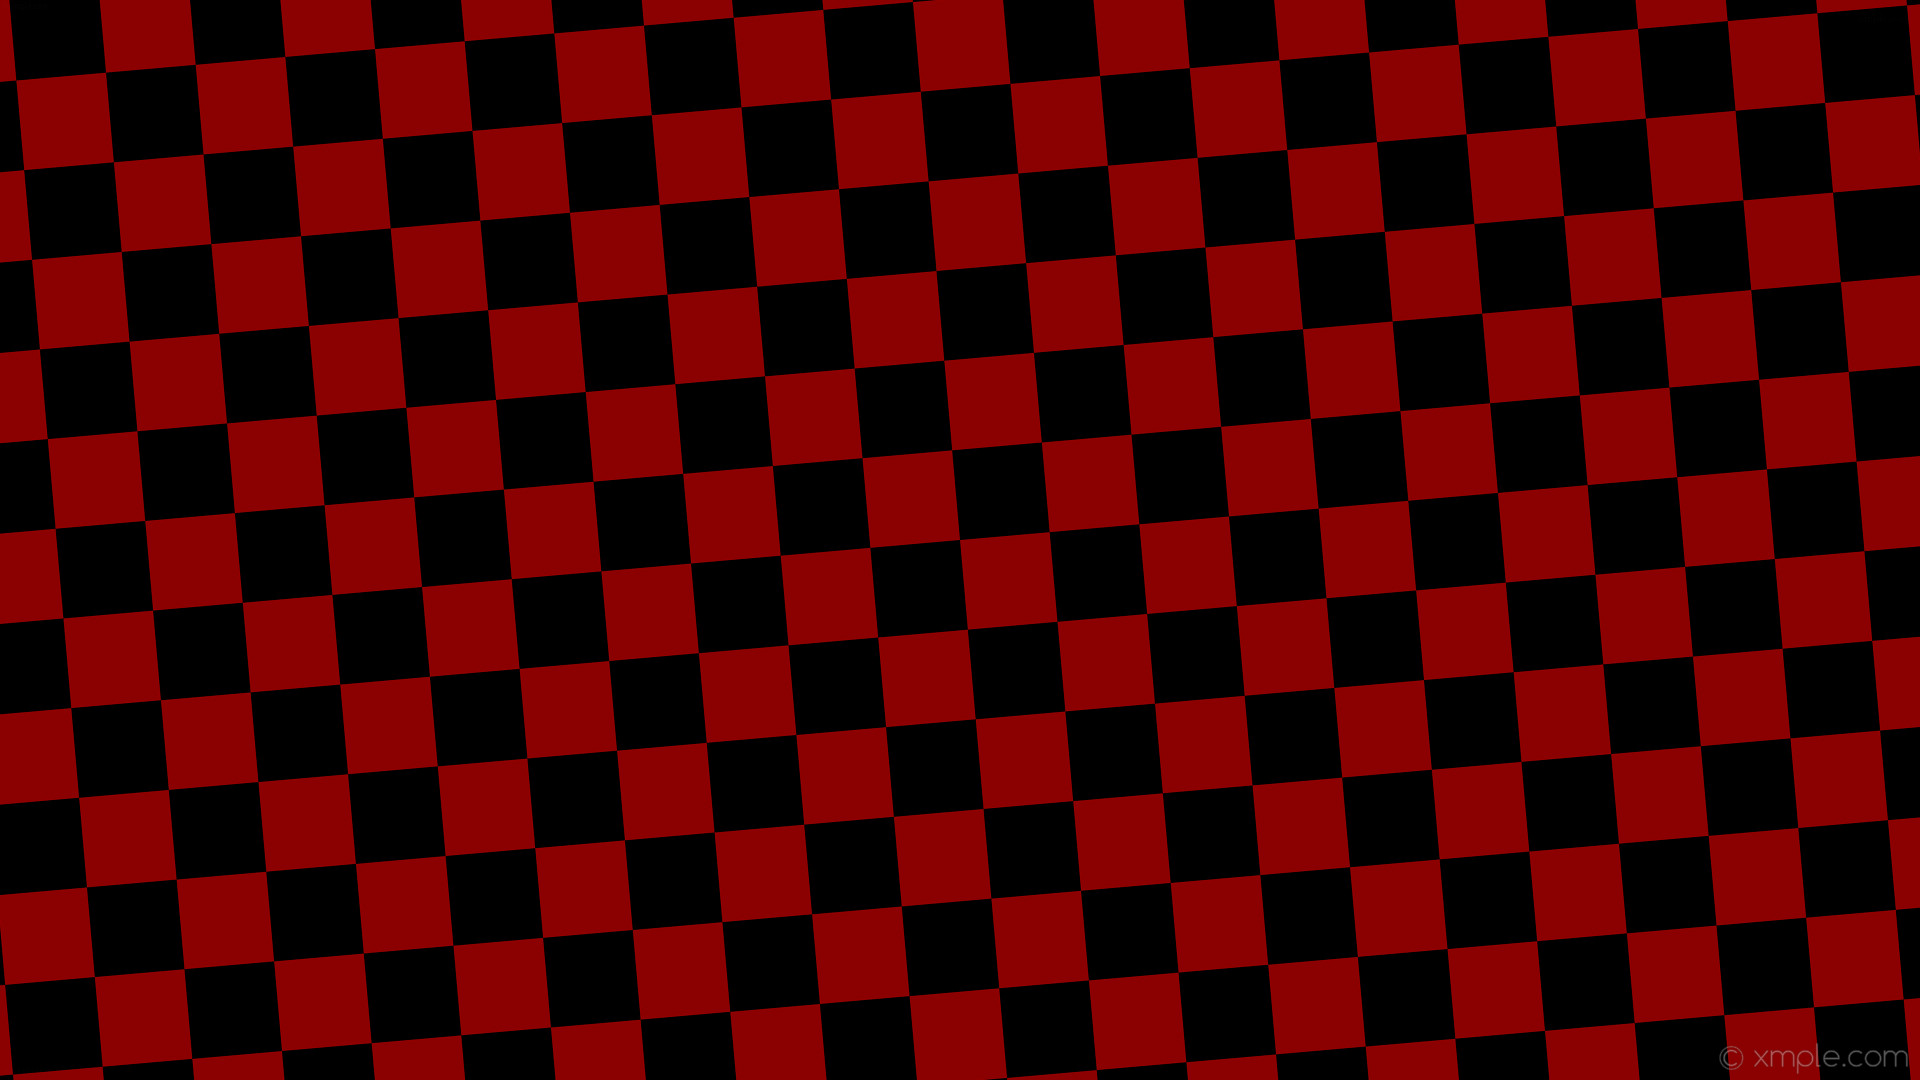 Red And White Checkered Wallpaper.